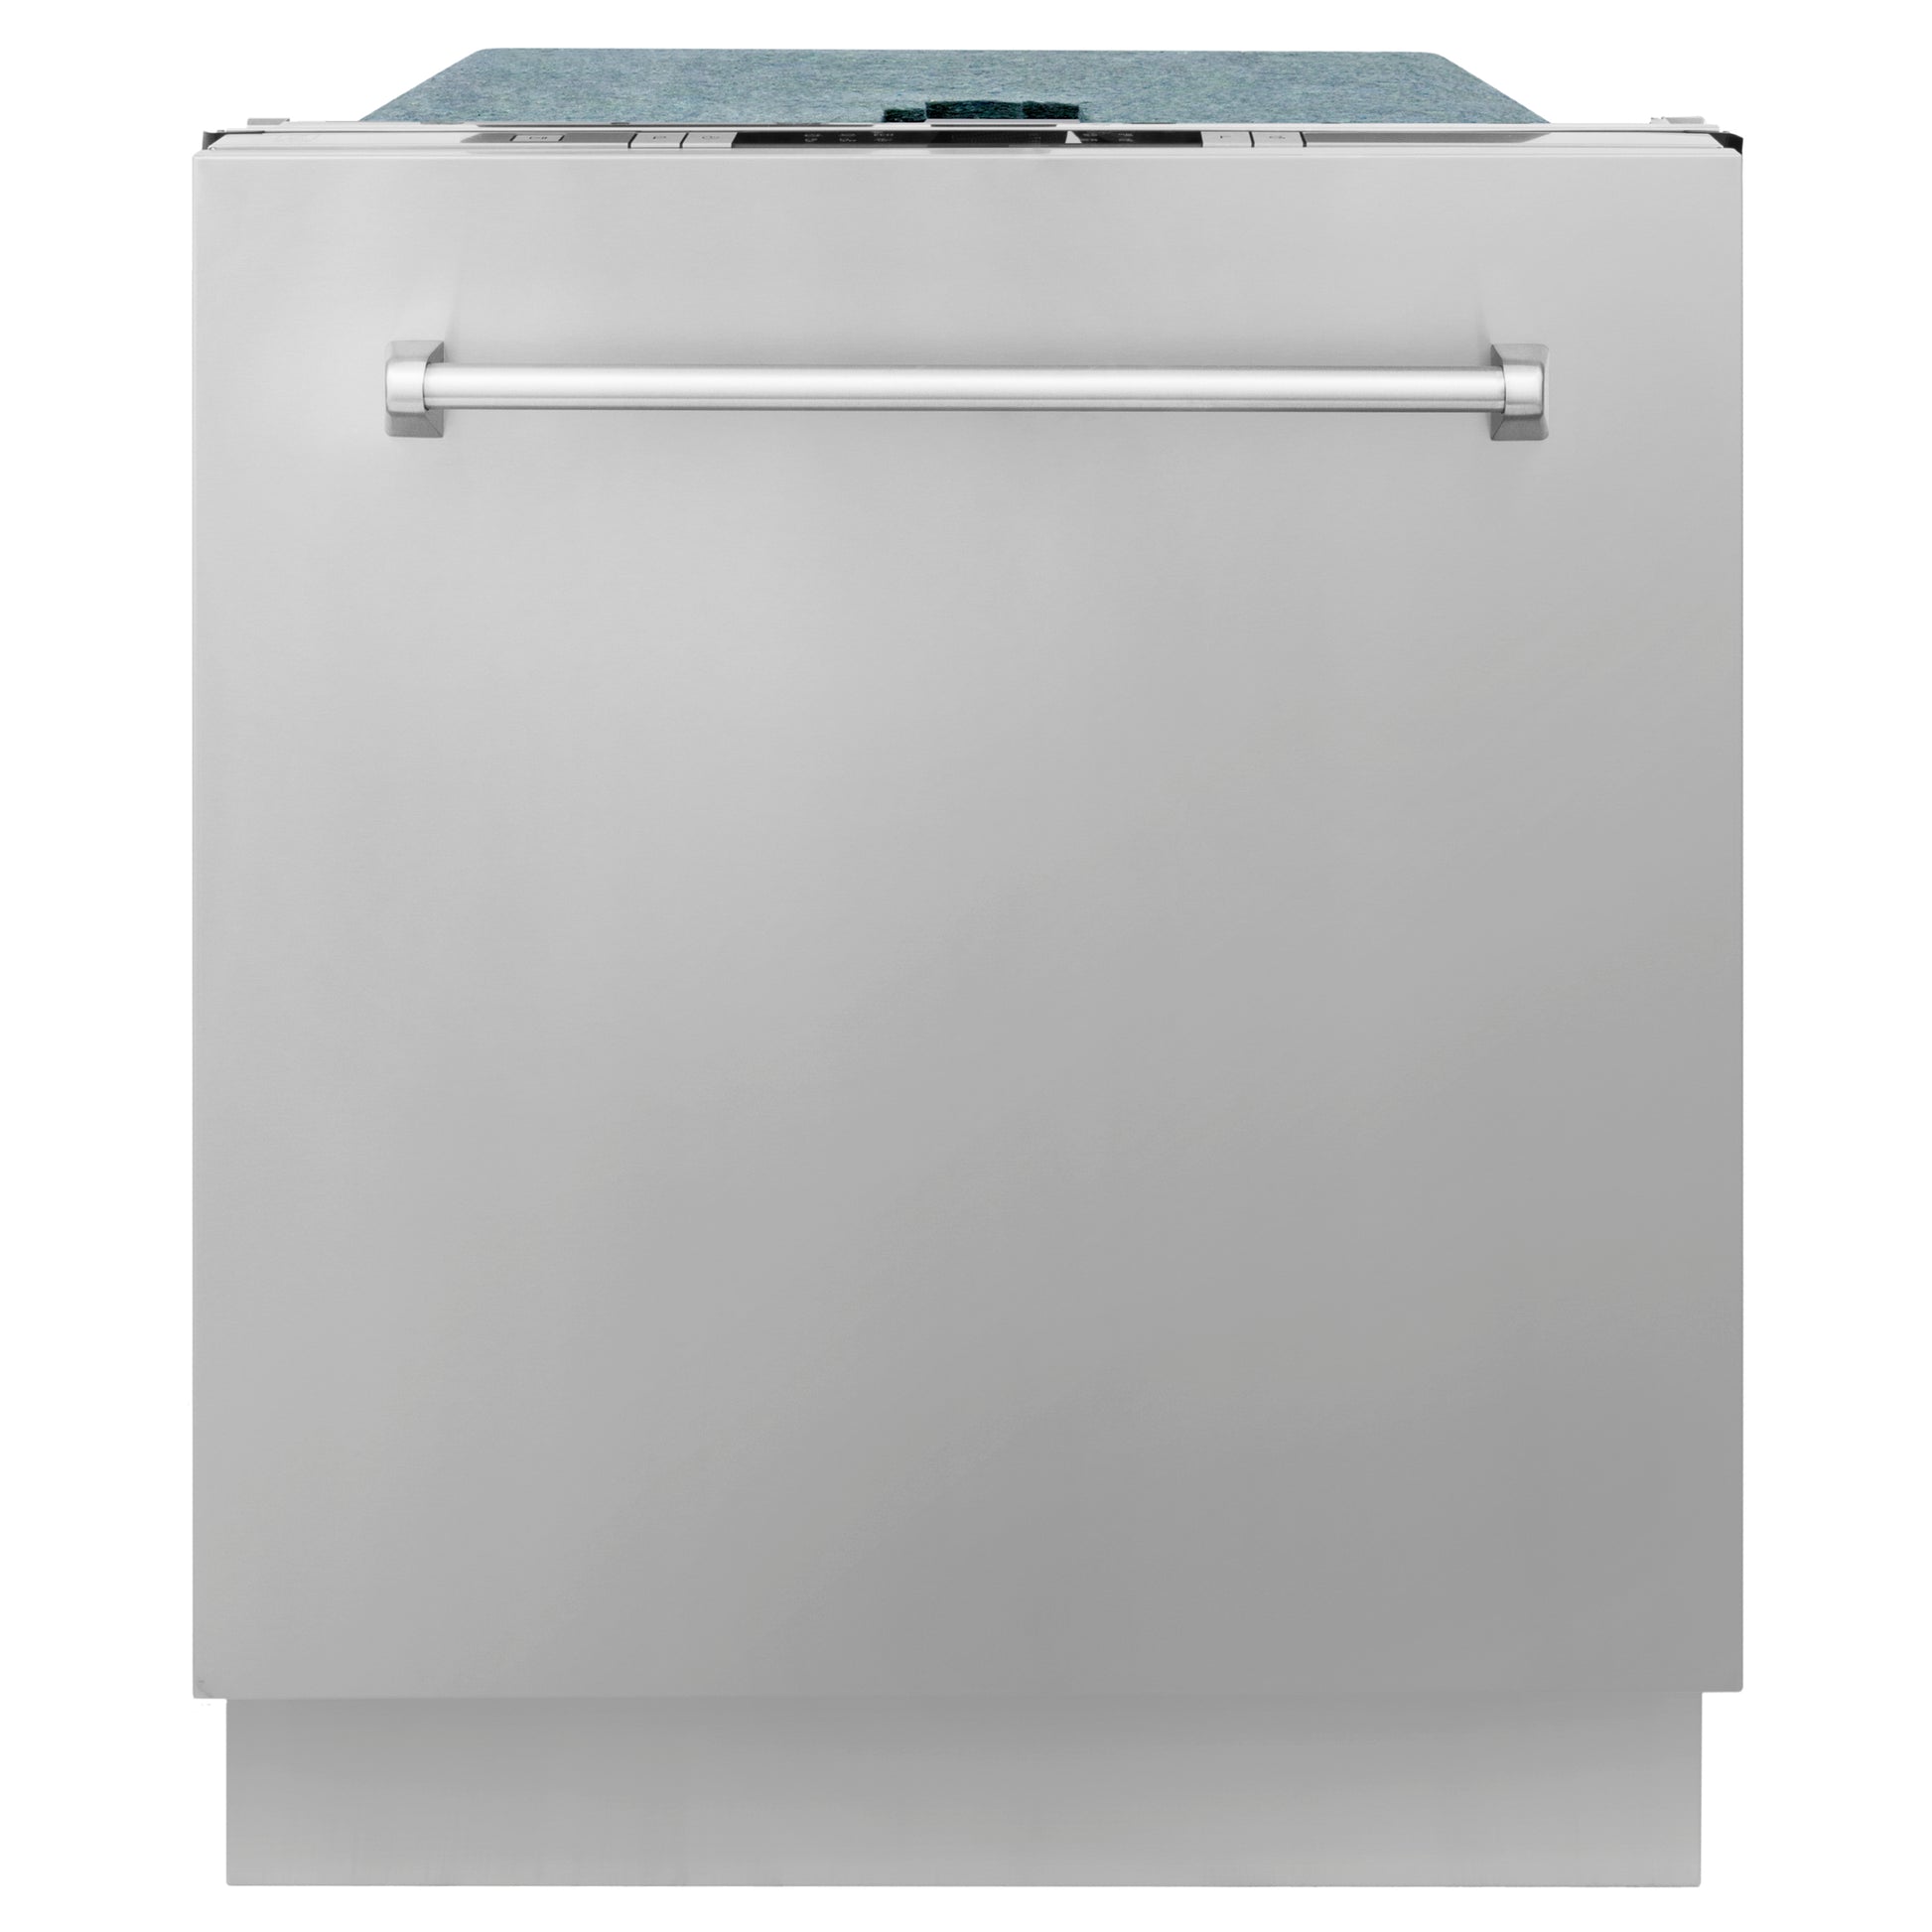 ZLINE 24 in. Top Control Dishwasher with Stainless Steel Panel and Traditional Style Handle, 52dBa (DW-304-H-24) front, closed.